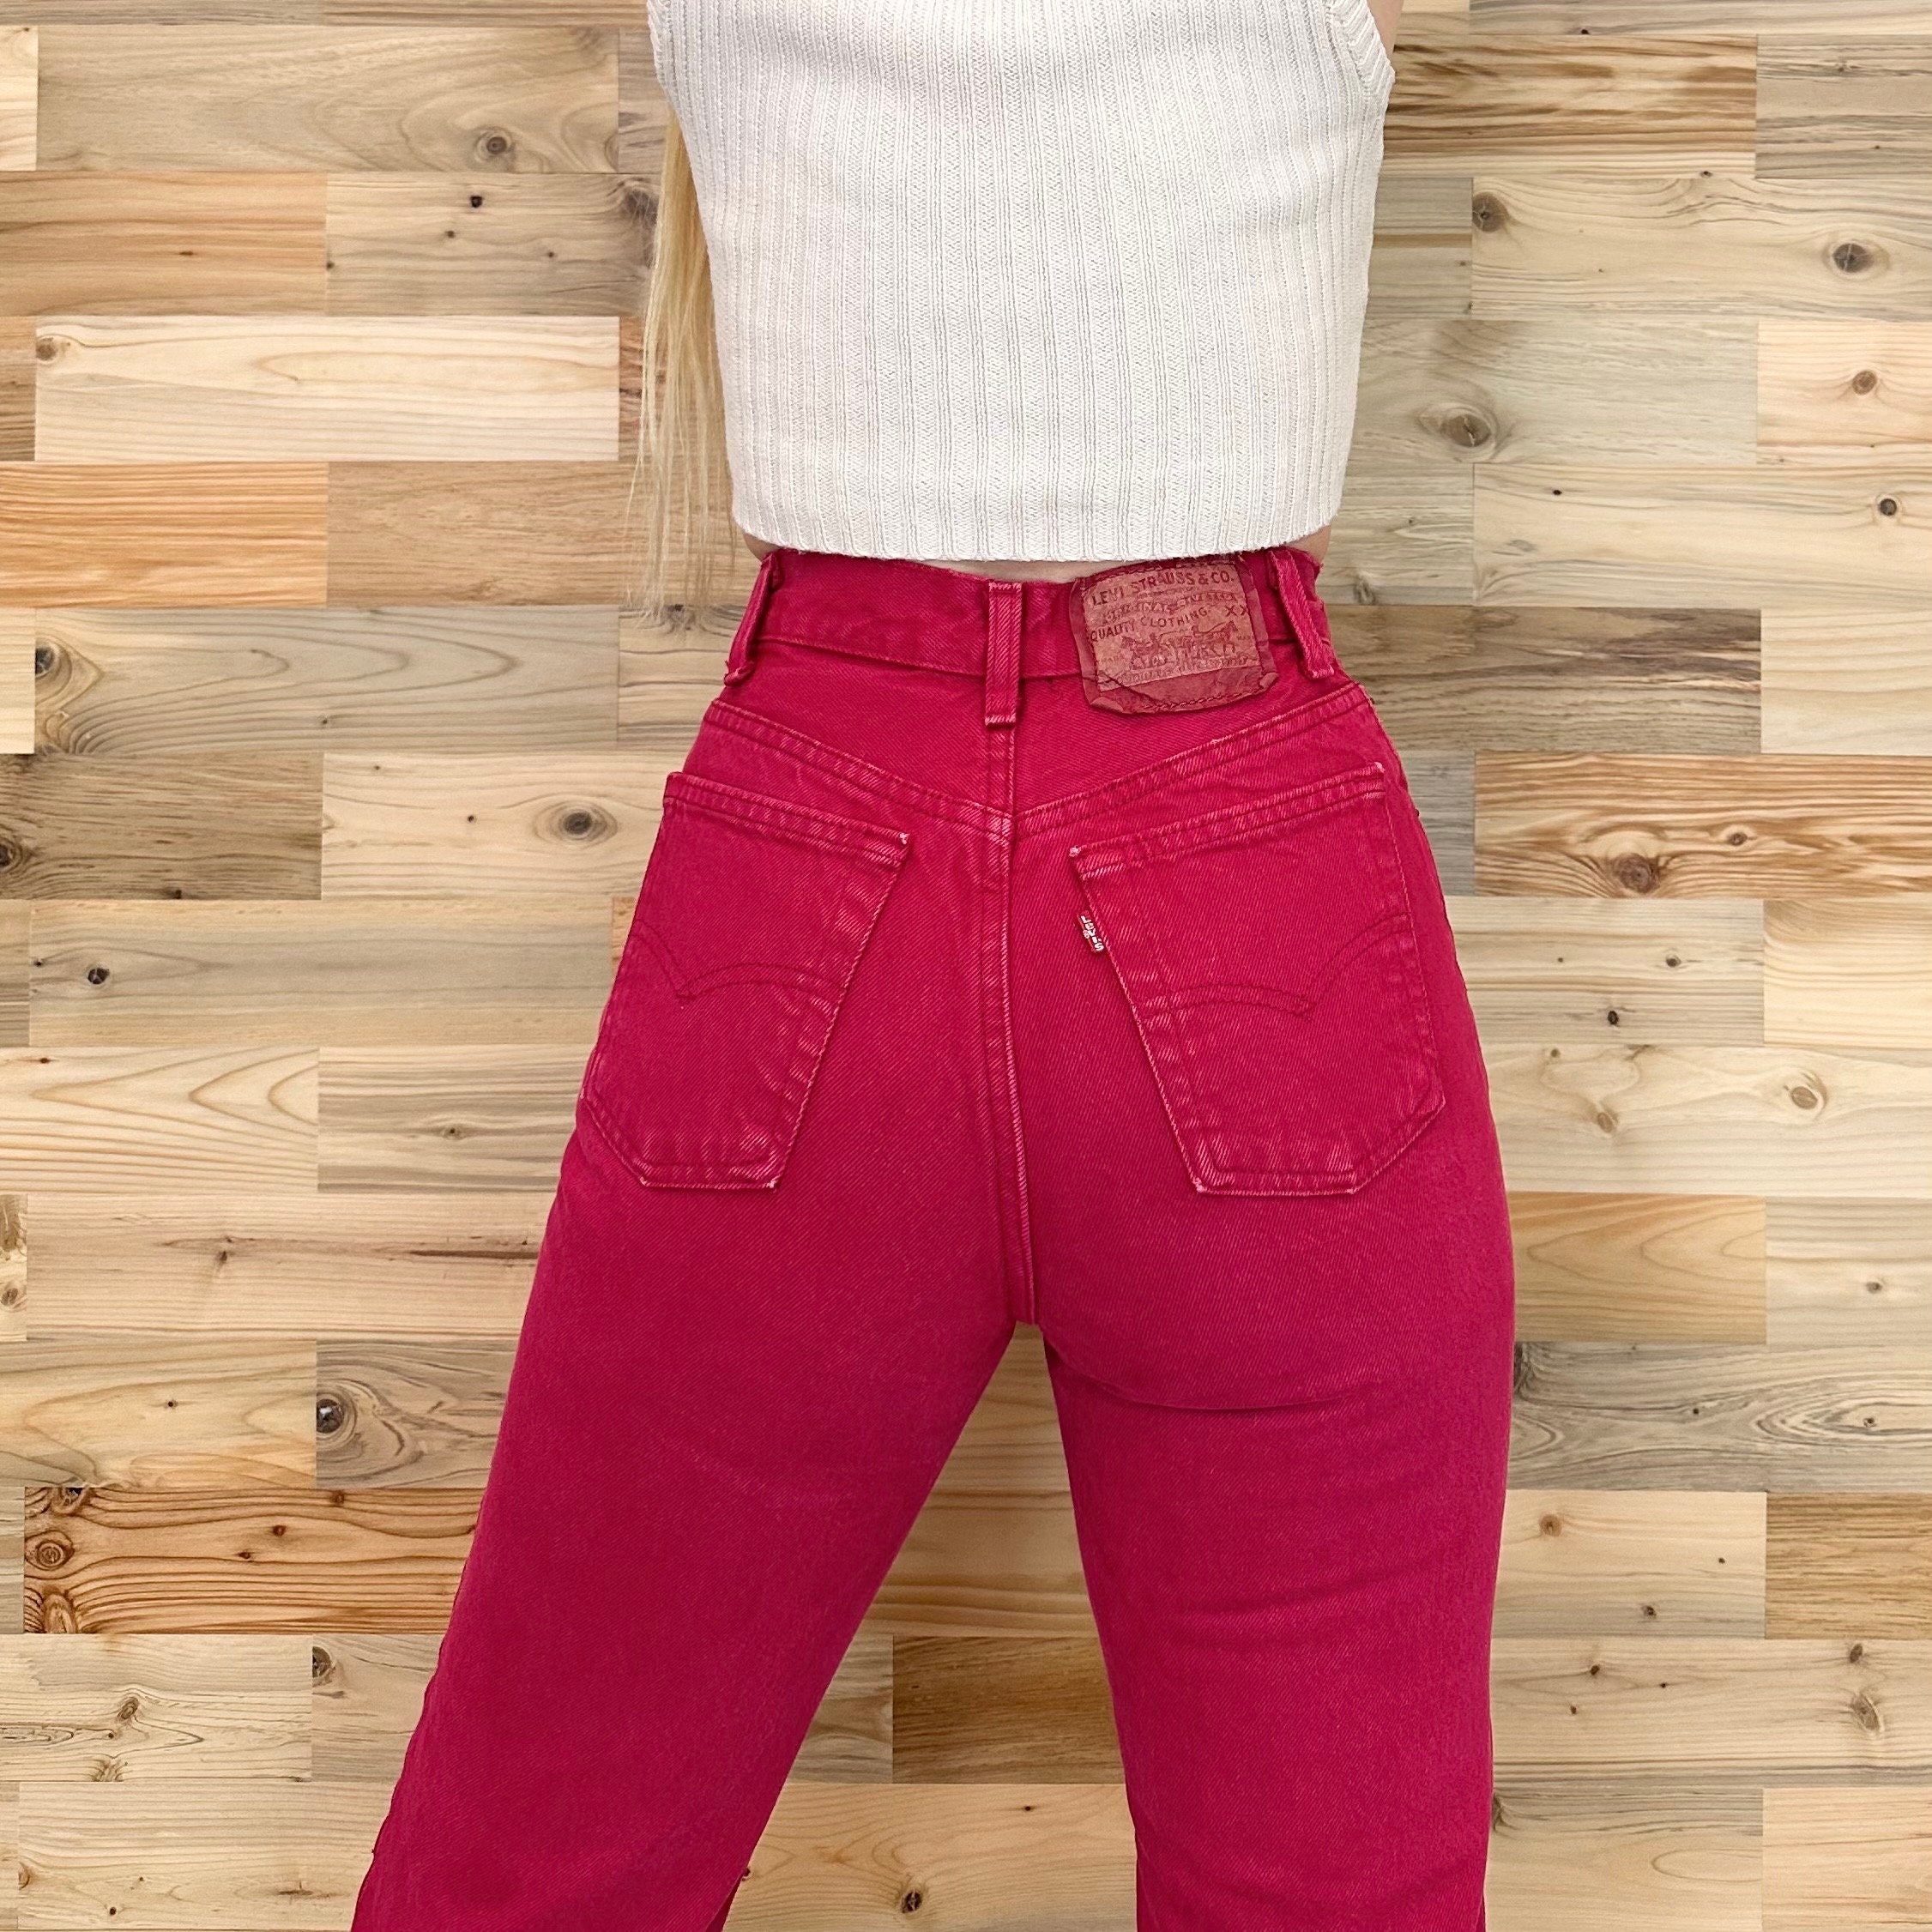 90s Coral Red High Waist Mom Jeans PLUS SIZE, Size 16, 33 Inch